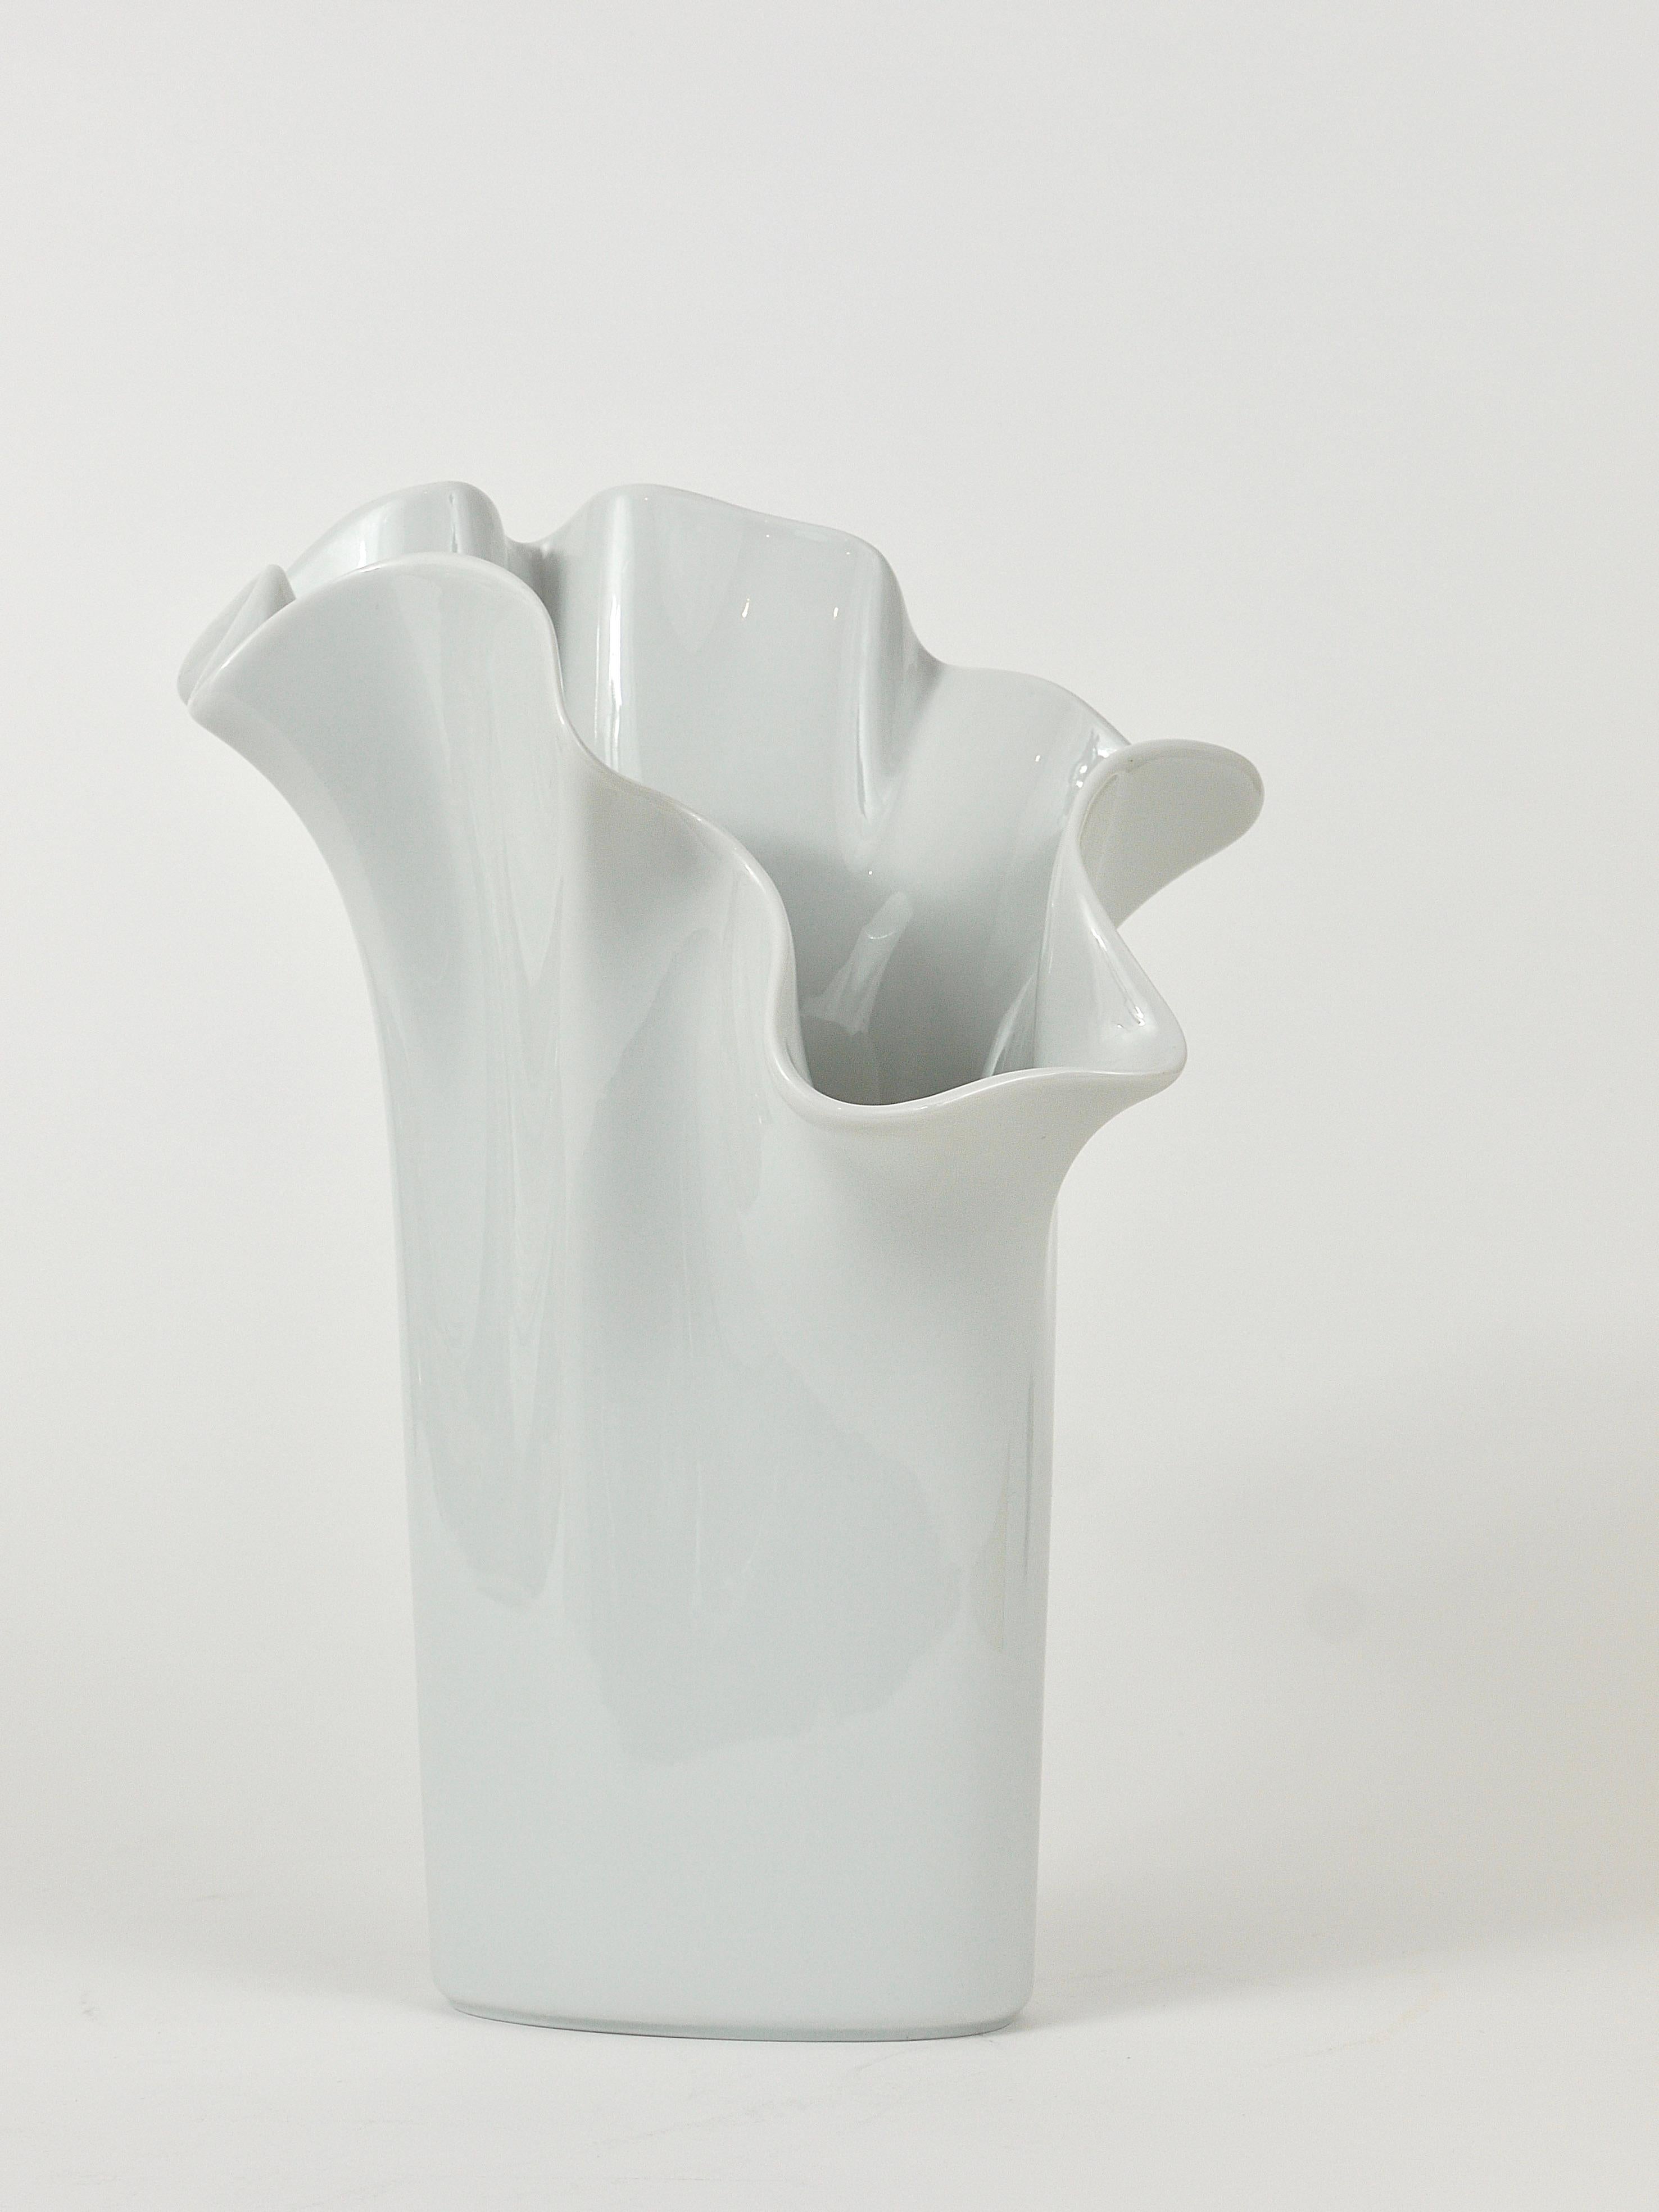 Rosenthal Studio-line Fazzoletto Asym Vase by Claus Josef Riedel, Germany, 1970s 1